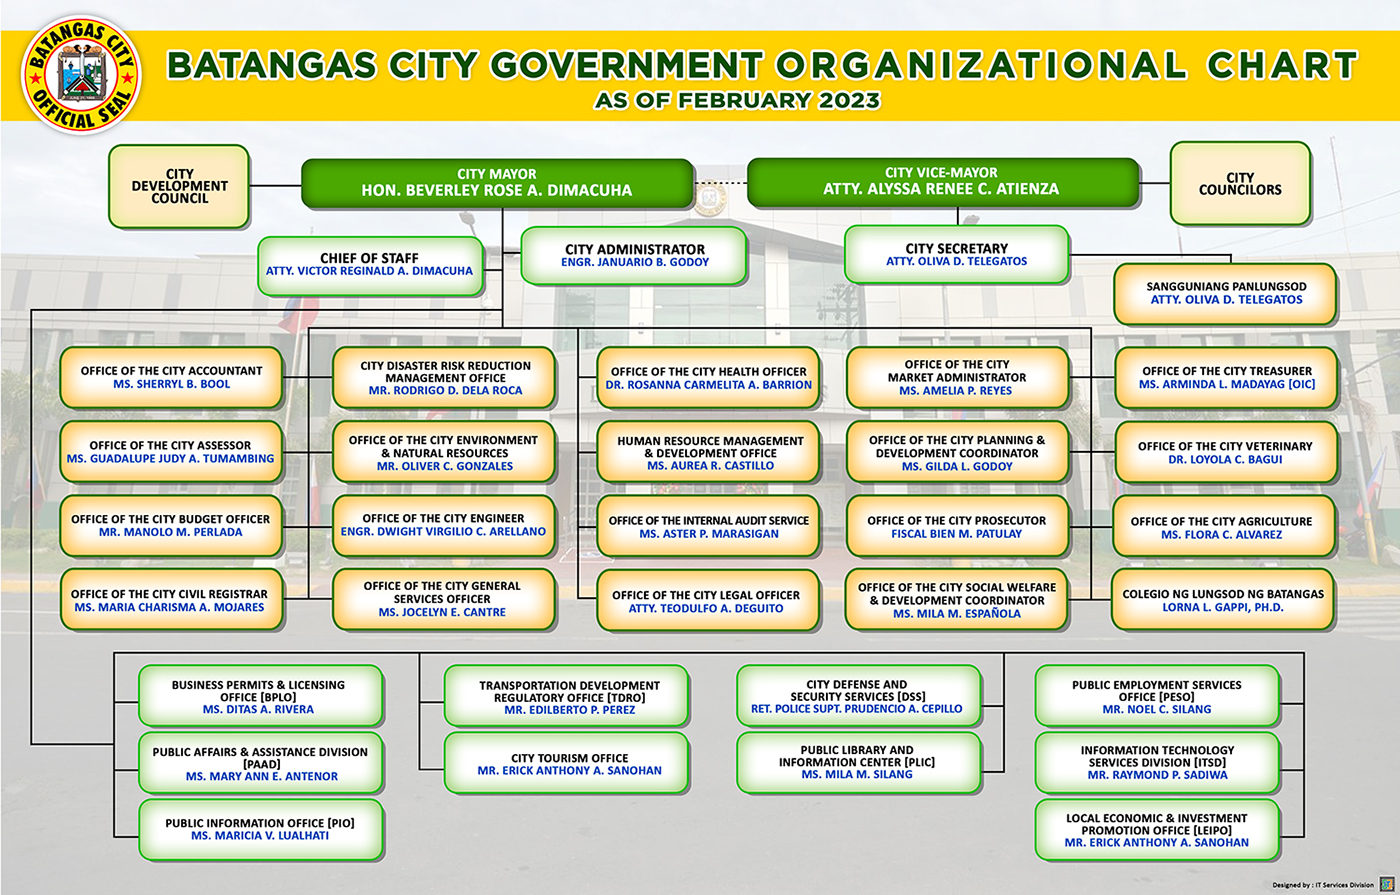 Organizational Chart Of Bfp In The Philippines